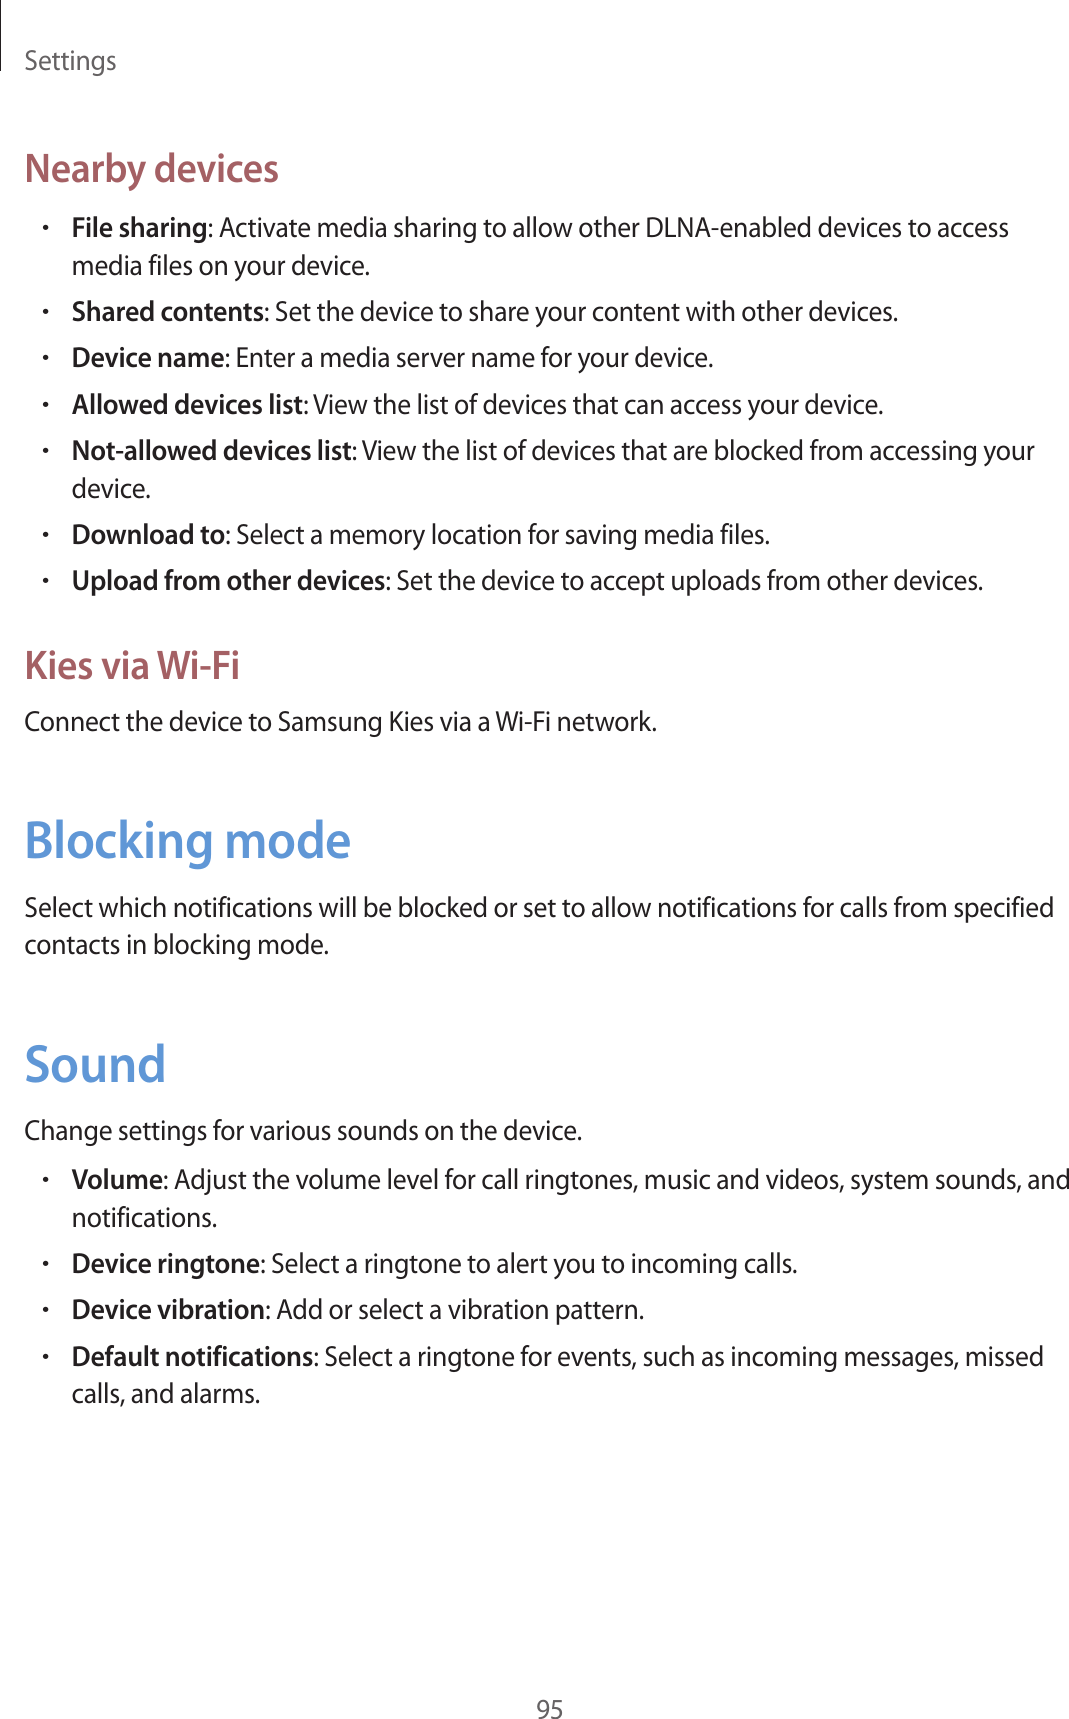 Settings95Nearby devices•File sharing: Activate media sharing to allow other DLNA-enabled devices to access media files on your device.•Shared contents: Set the device to share your content with other devices.•Device name: Enter a media server name for your device.•Allowed devices list: View the list of devices that can access your device.•Not-allowed devices list: View the list of devices that are blocked from accessing your device.•Download to: Select a memory location for saving media files.•Upload from other devices: Set the device to accept uploads from other devices.Kies via Wi-FiConnect the device to Samsung Kies via a Wi-Fi network.Blocking modeSelect which notifications will be blocked or set to allow notifications for calls from specified contacts in blocking mode.SoundChange settings for various sounds on the device.•Volume: Adjust the volume level for call ringtones, music and videos, system sounds, and notifications.•Device ringtone: Select a ringtone to alert you to incoming calls.•Device vibration: Add or select a vibration pattern.•Default notifications: Select a ringtone for events, such as incoming messages, missed calls, and alarms.